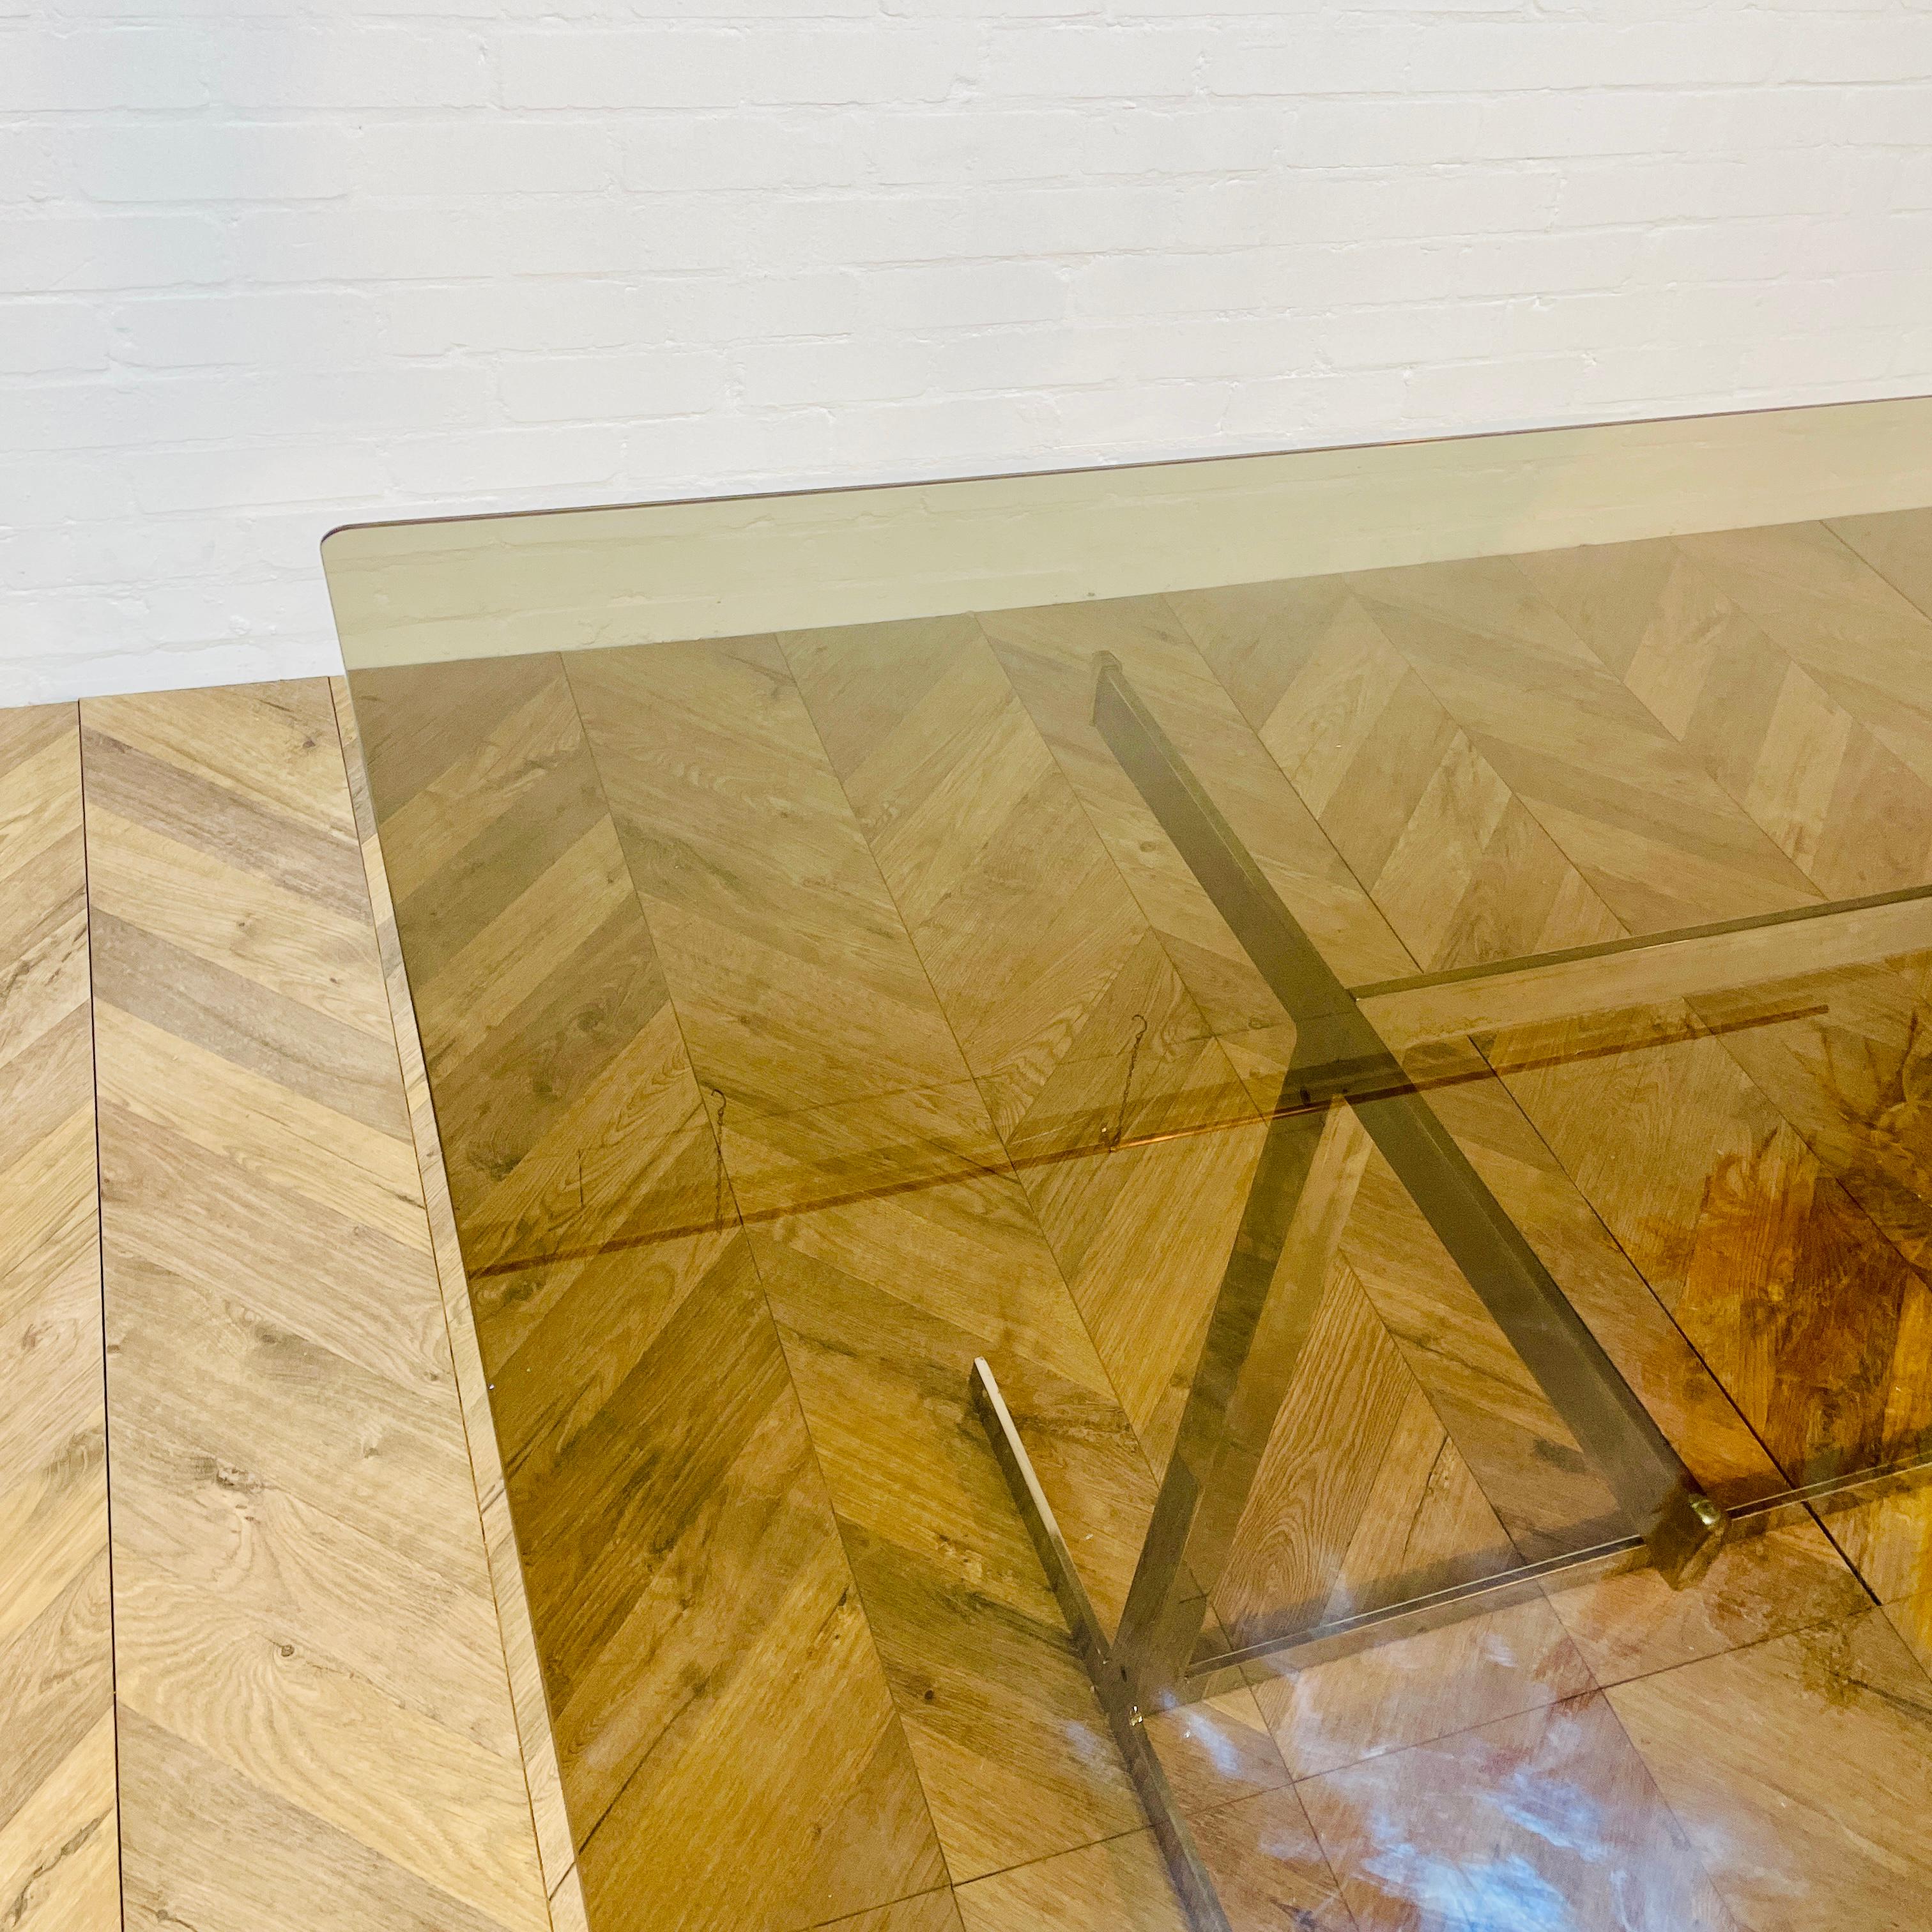 A Stylish Mid Century, Modernist Smoked Glass And Chrome Dining Table, comfortably seats 6.

Designed by Tim Bates for English manufacturer Pieff of Worcester, with toughened smoked glass top, raised on a polished chrome metal frame in the Bauhaus